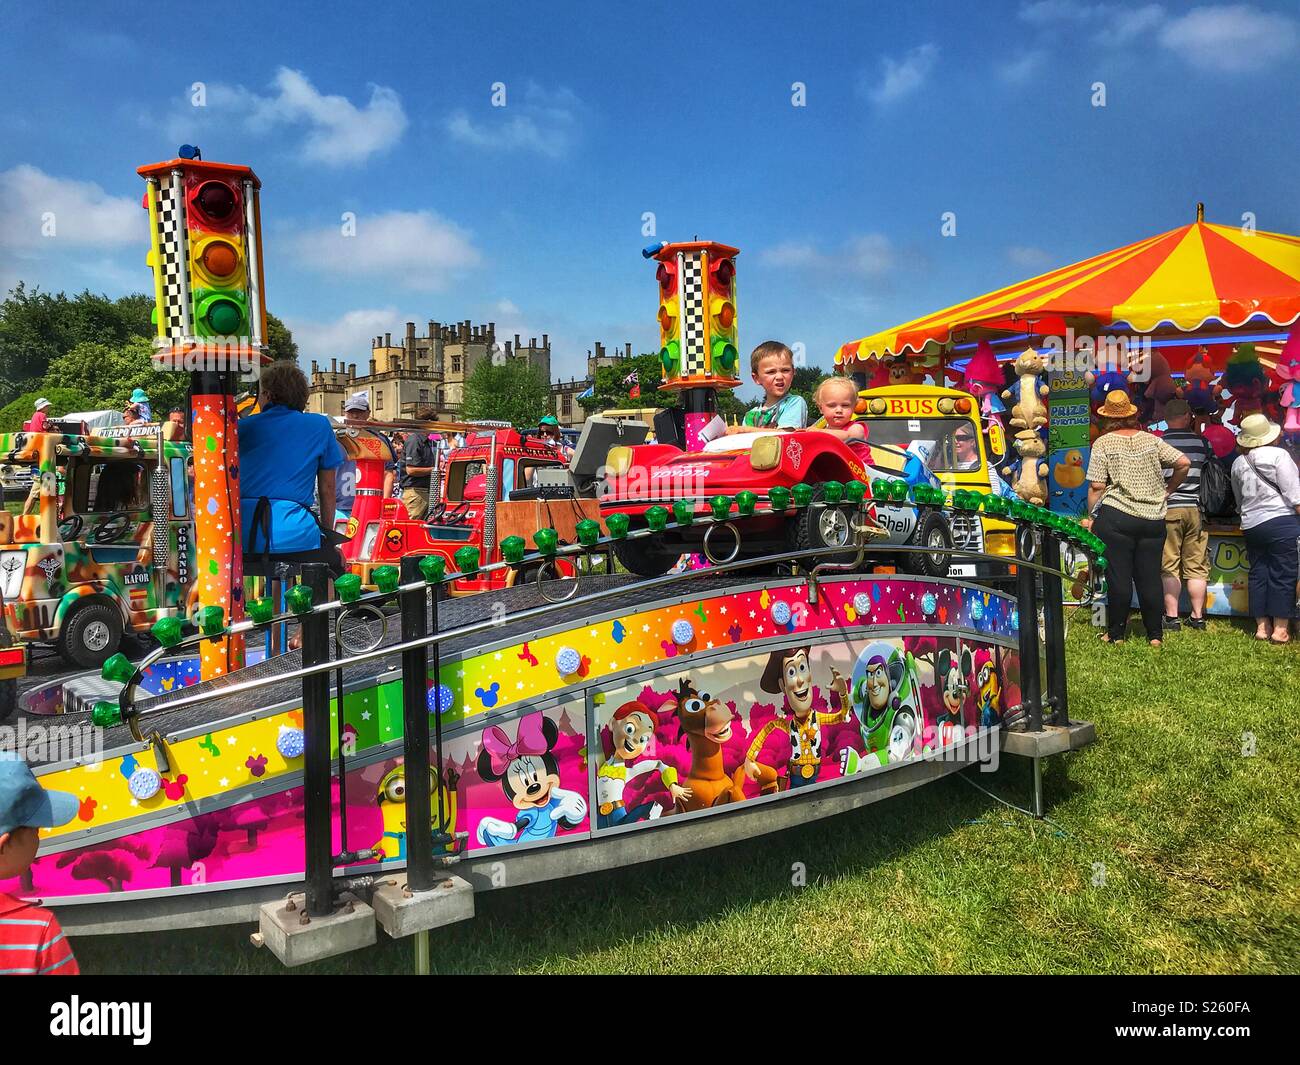 Fairground rides, children on a Merry-go-round, and a side stall game at the annual Sherborne Castle Country Fair, Sherborne, Dorset, England Stock Photo